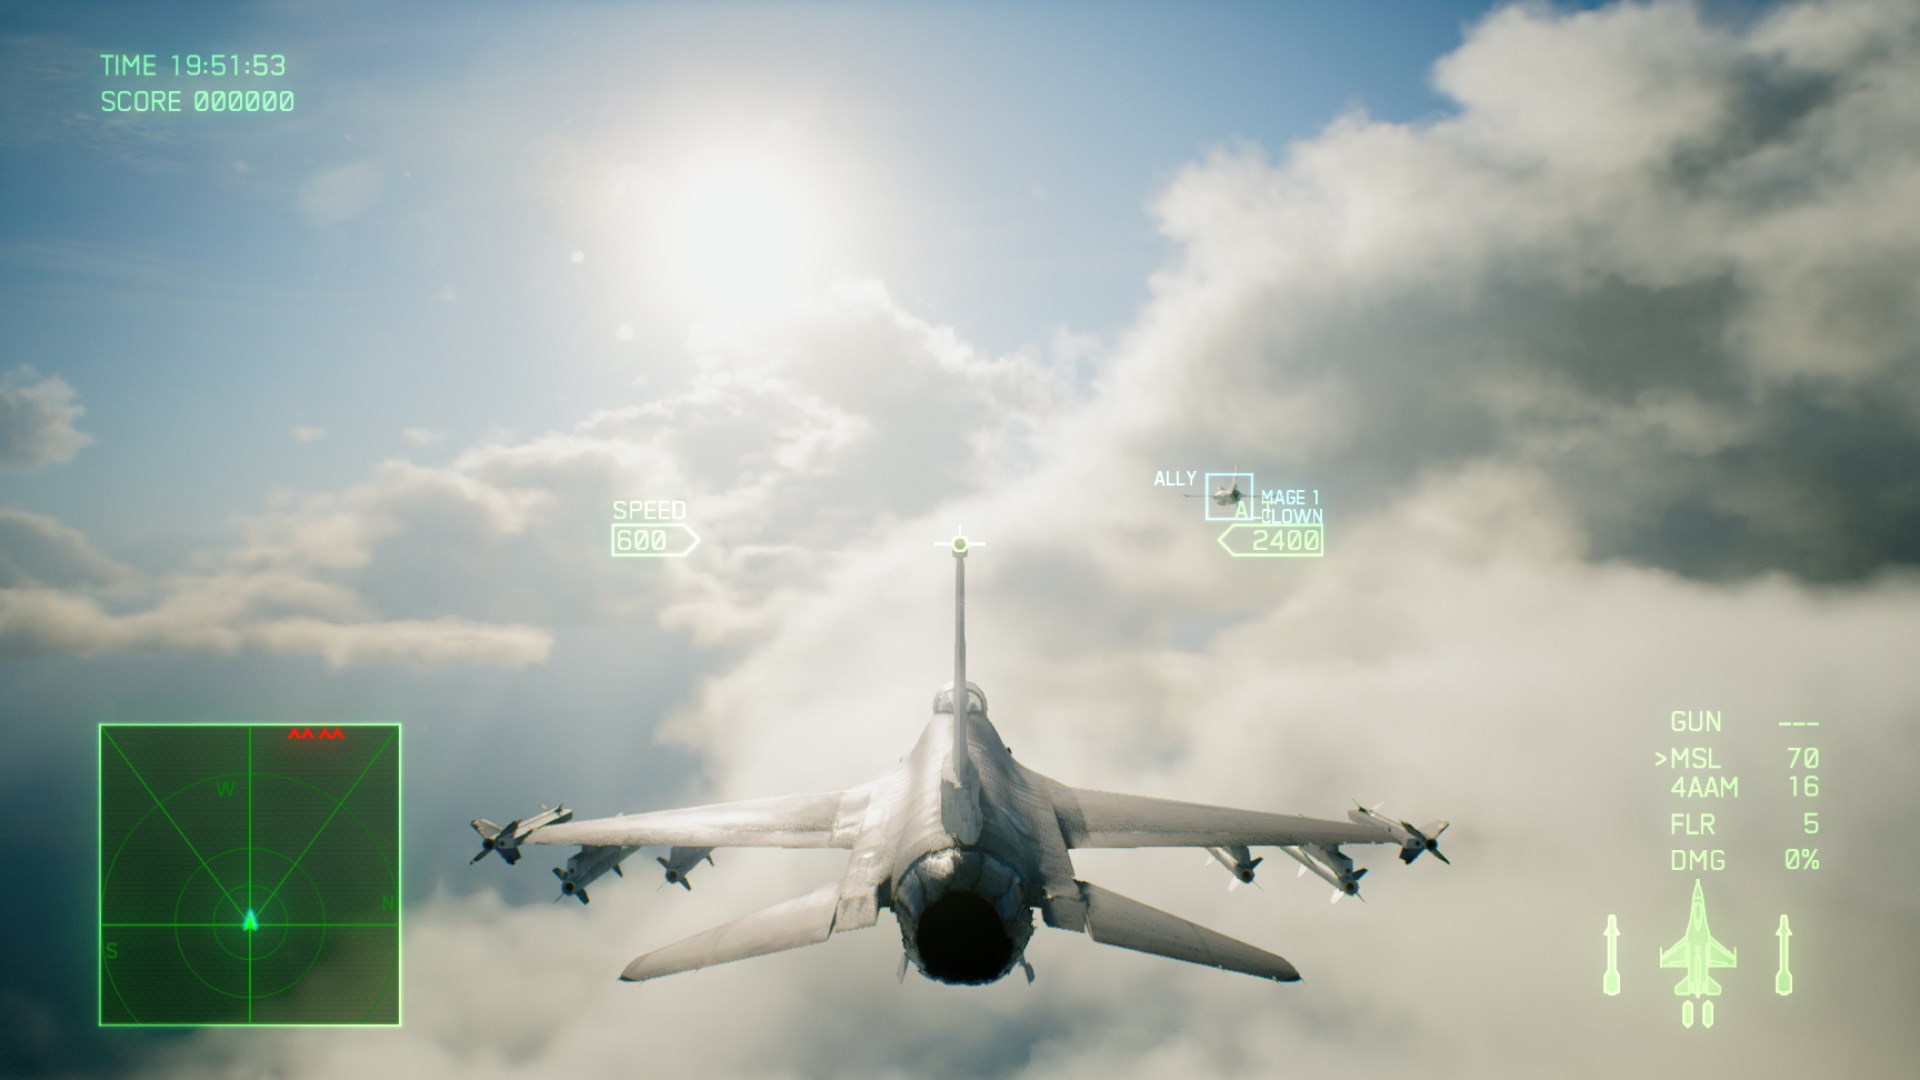 ace combat 7 skies unknown xbox one